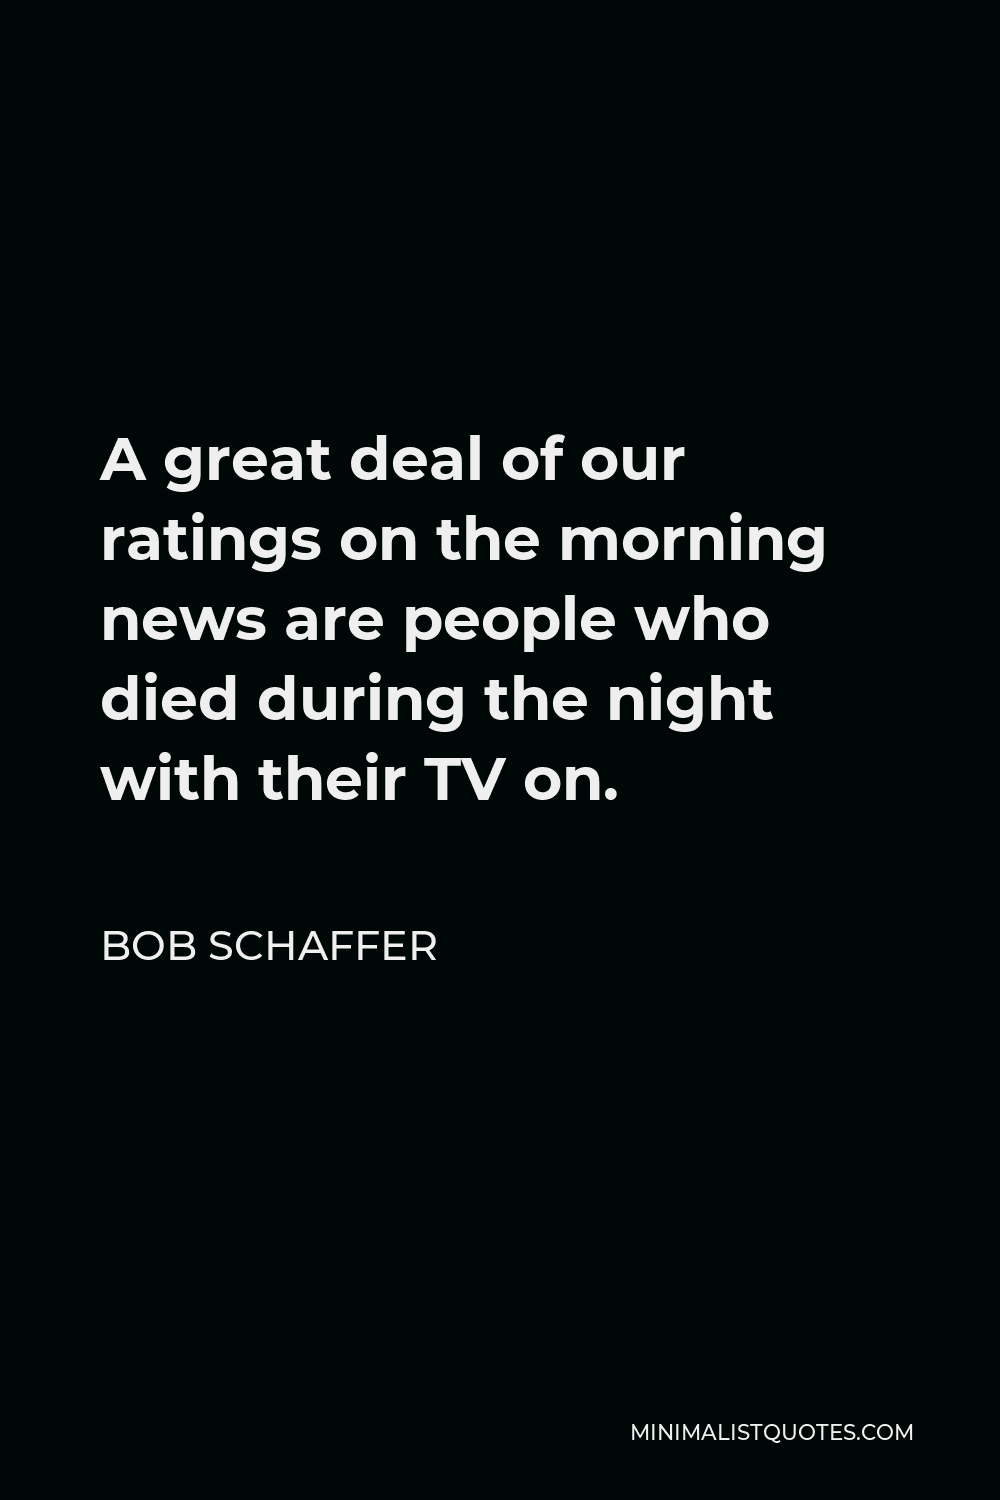 Bob Schaffer Quote - A great deal of our ratings on the morning news are people who died during the night with their TV on.